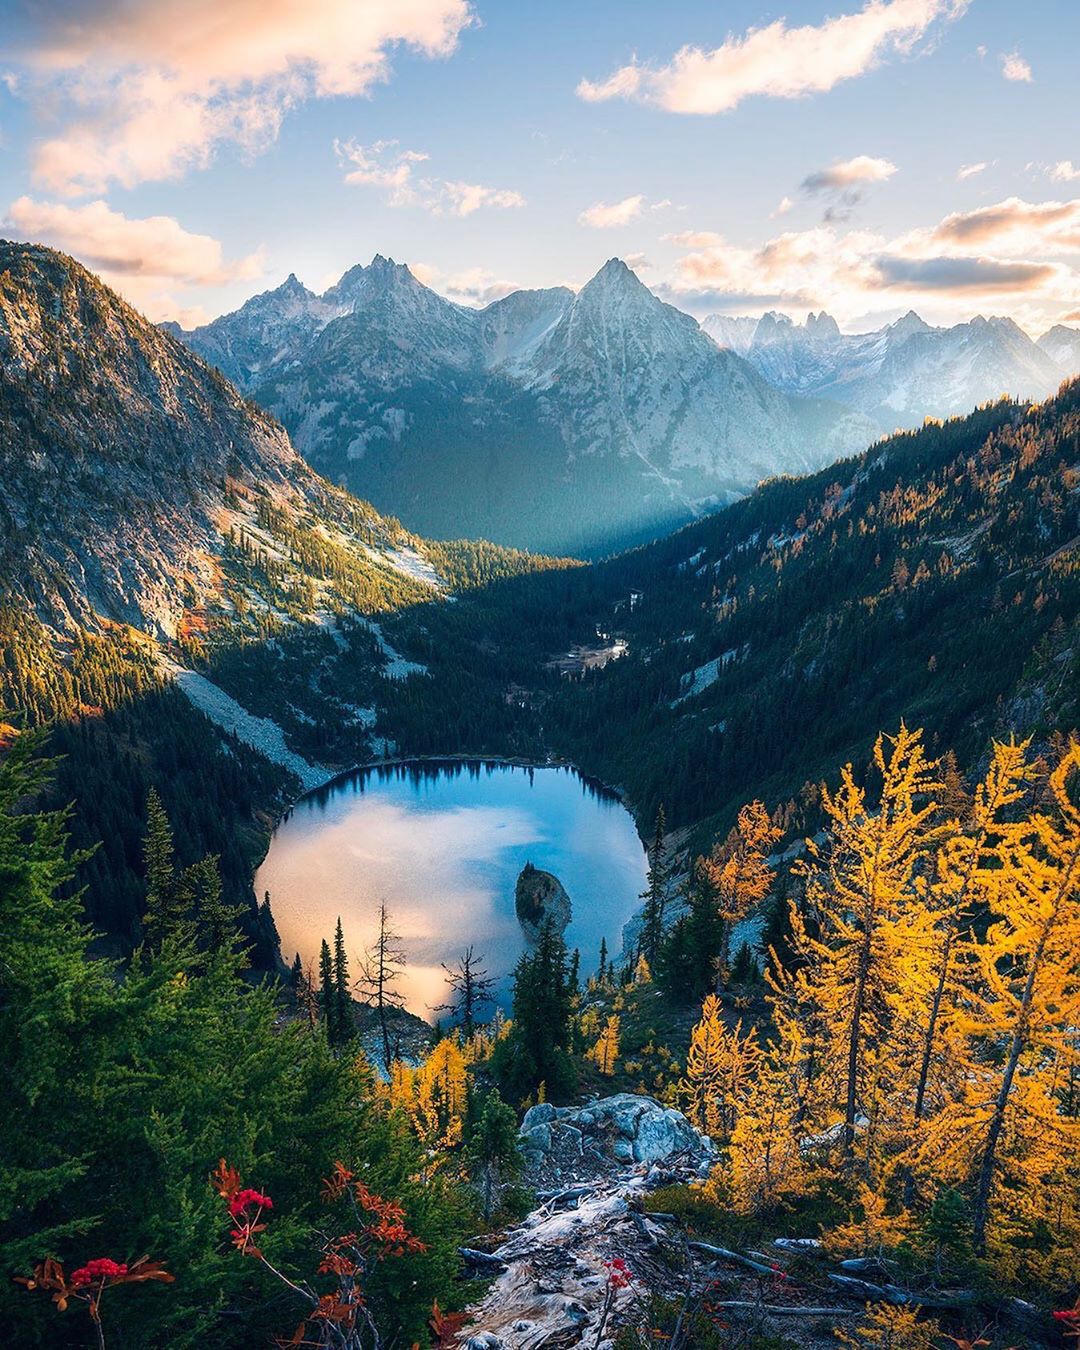 Lake, Mountains, and Trees in North Cascades National Park. Photo by Instagram user @alberthbyang